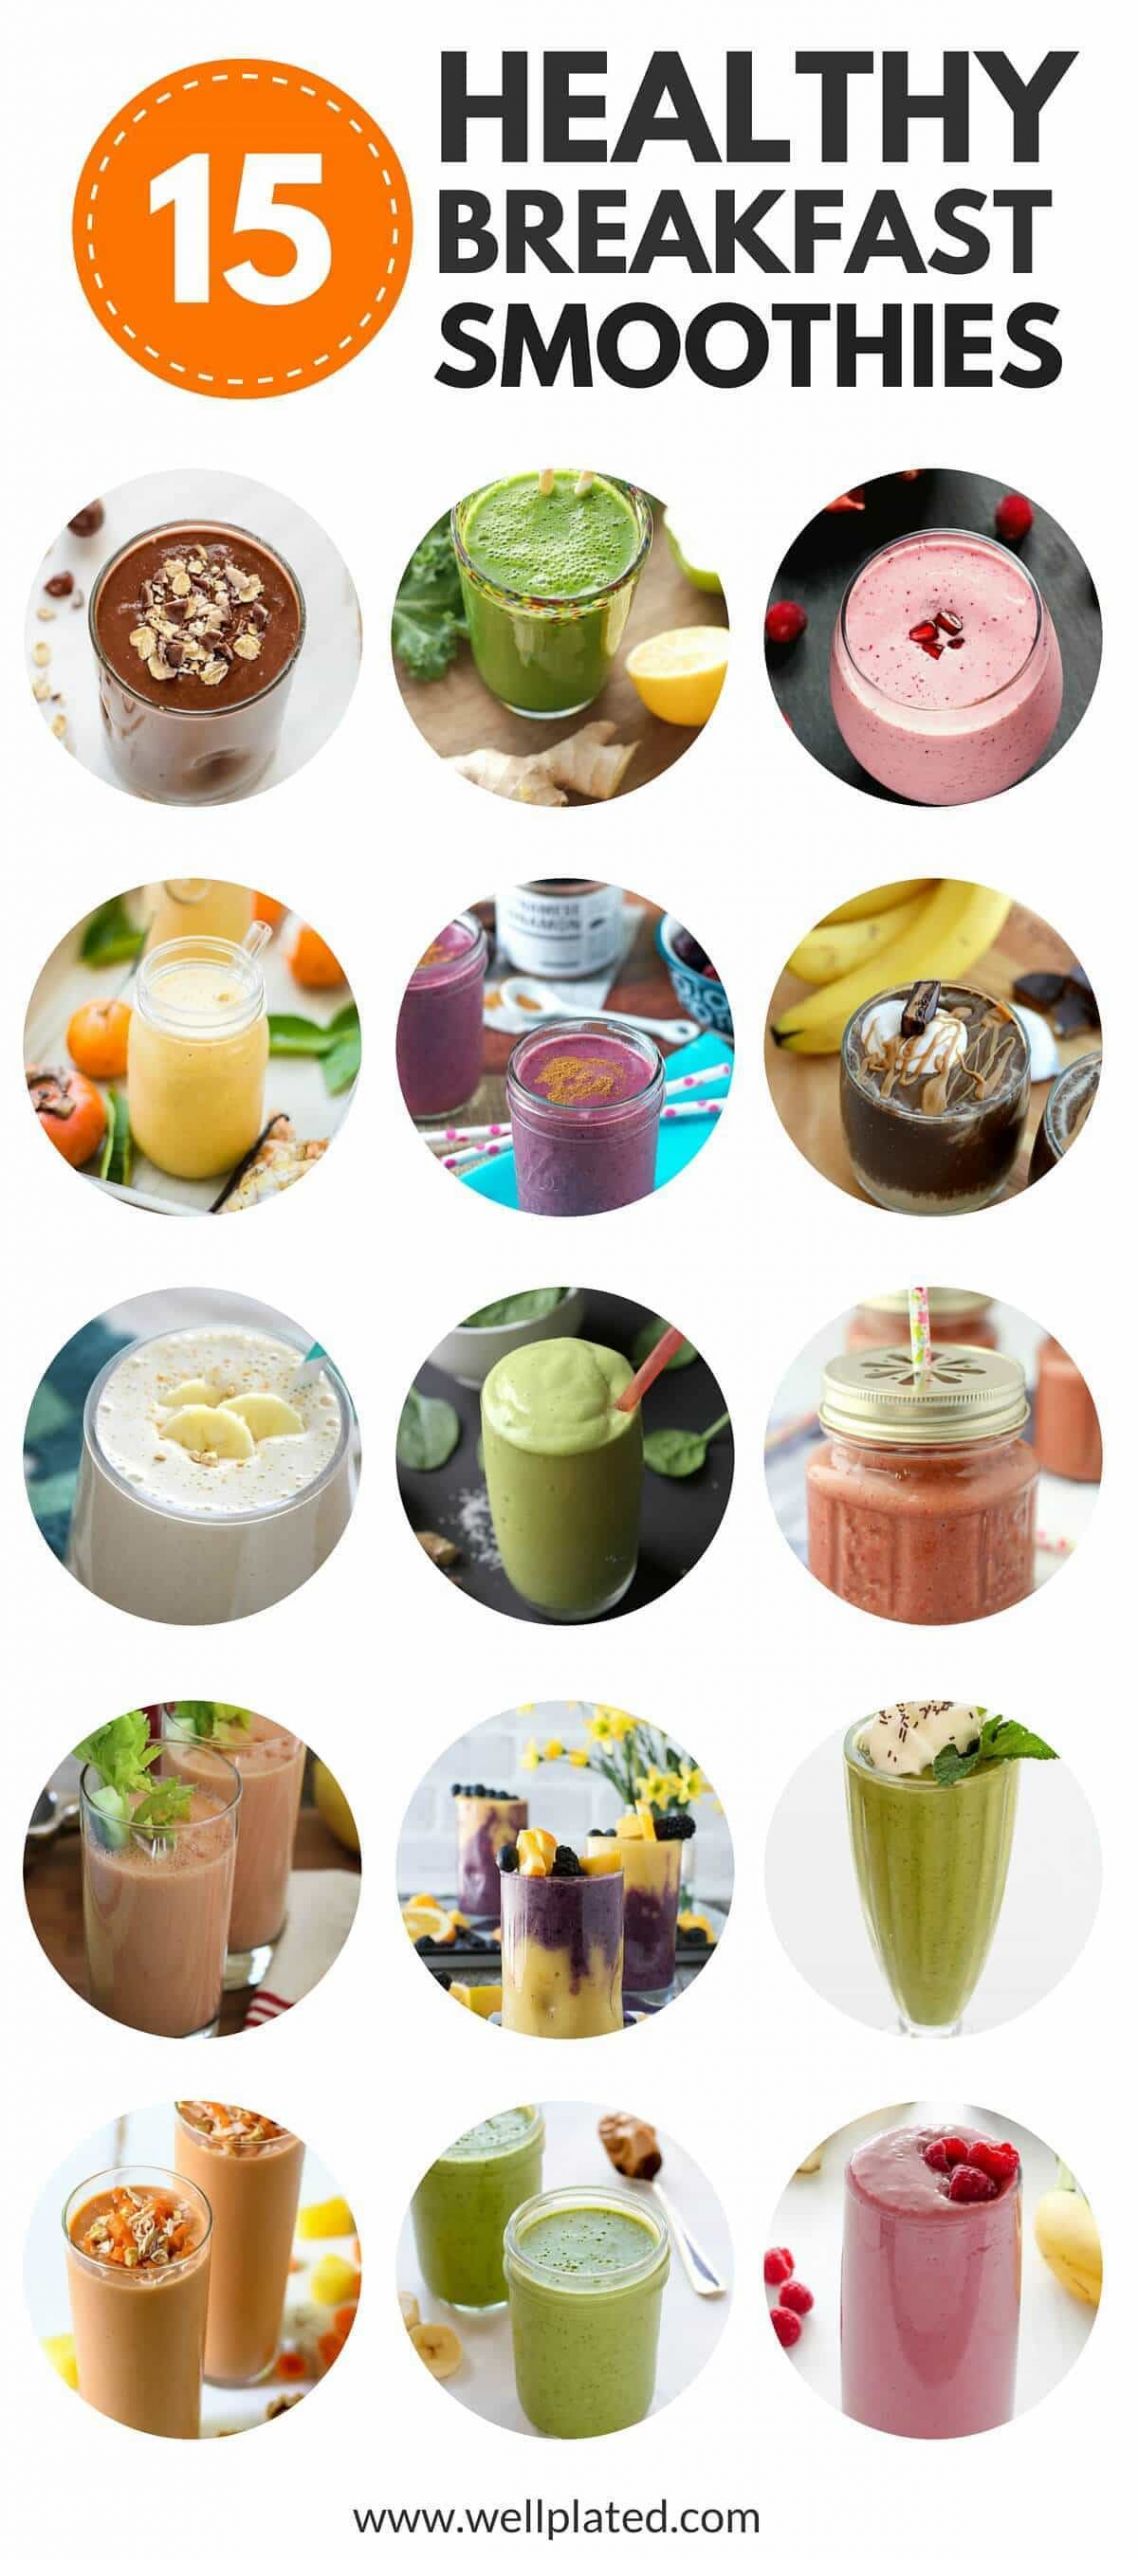 Weight Loss Smoothies Ingredients
 Healthy Breakfast Smoothies 20 of the Best Recipes